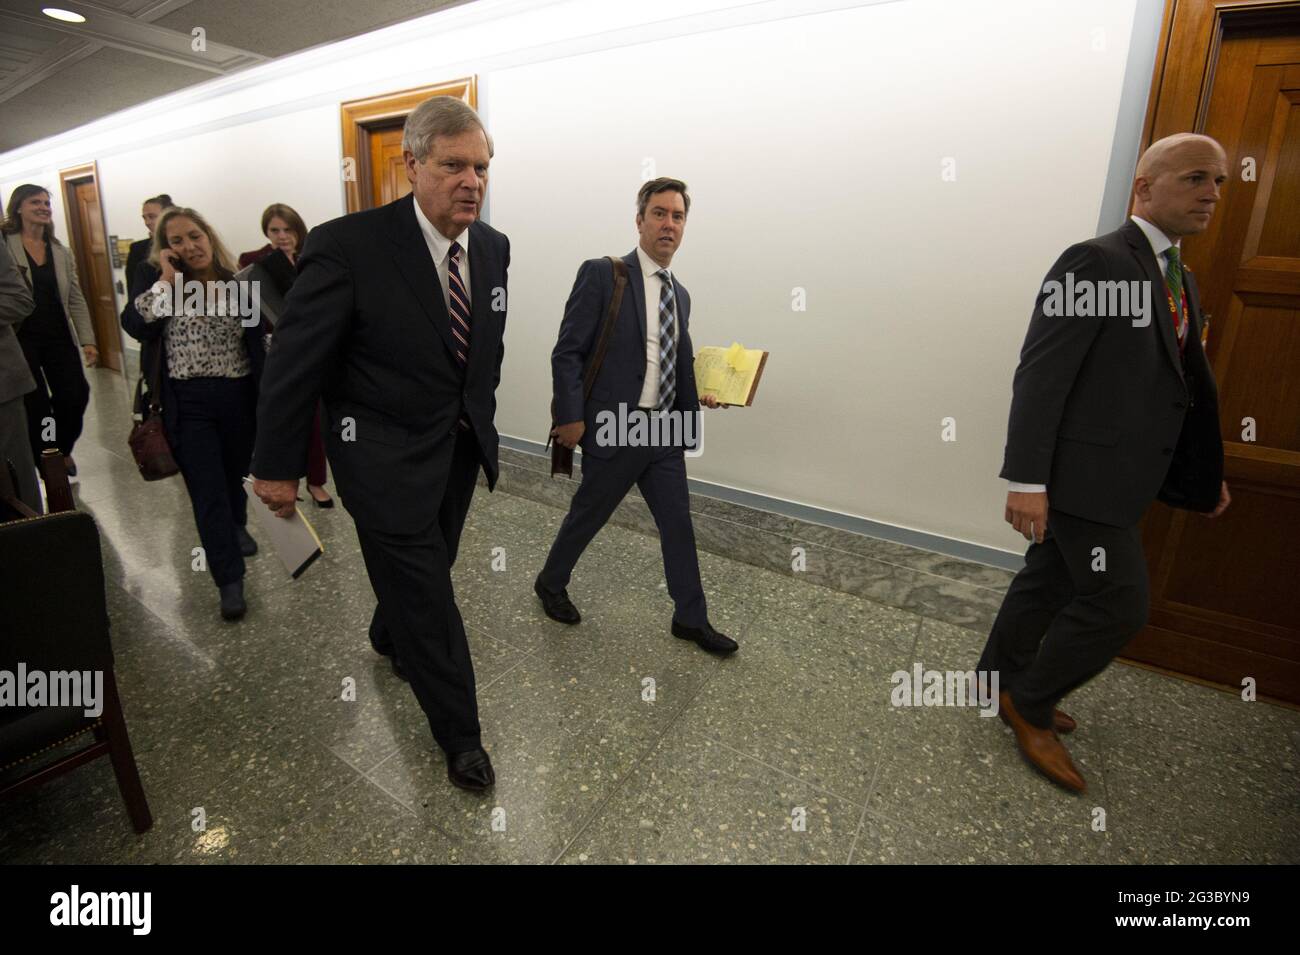 Secretary of the U.S. Department of Agriculture Tom Vilsack .arrives at a Senate Subcommittee hearing on the Department of Agriculture's proposed budget estimates for fiscal year 2022 in Washington, DC., on Wednesday, June 10, 2021.      Photo by Bonnie Cash/UPI. Stock Photo